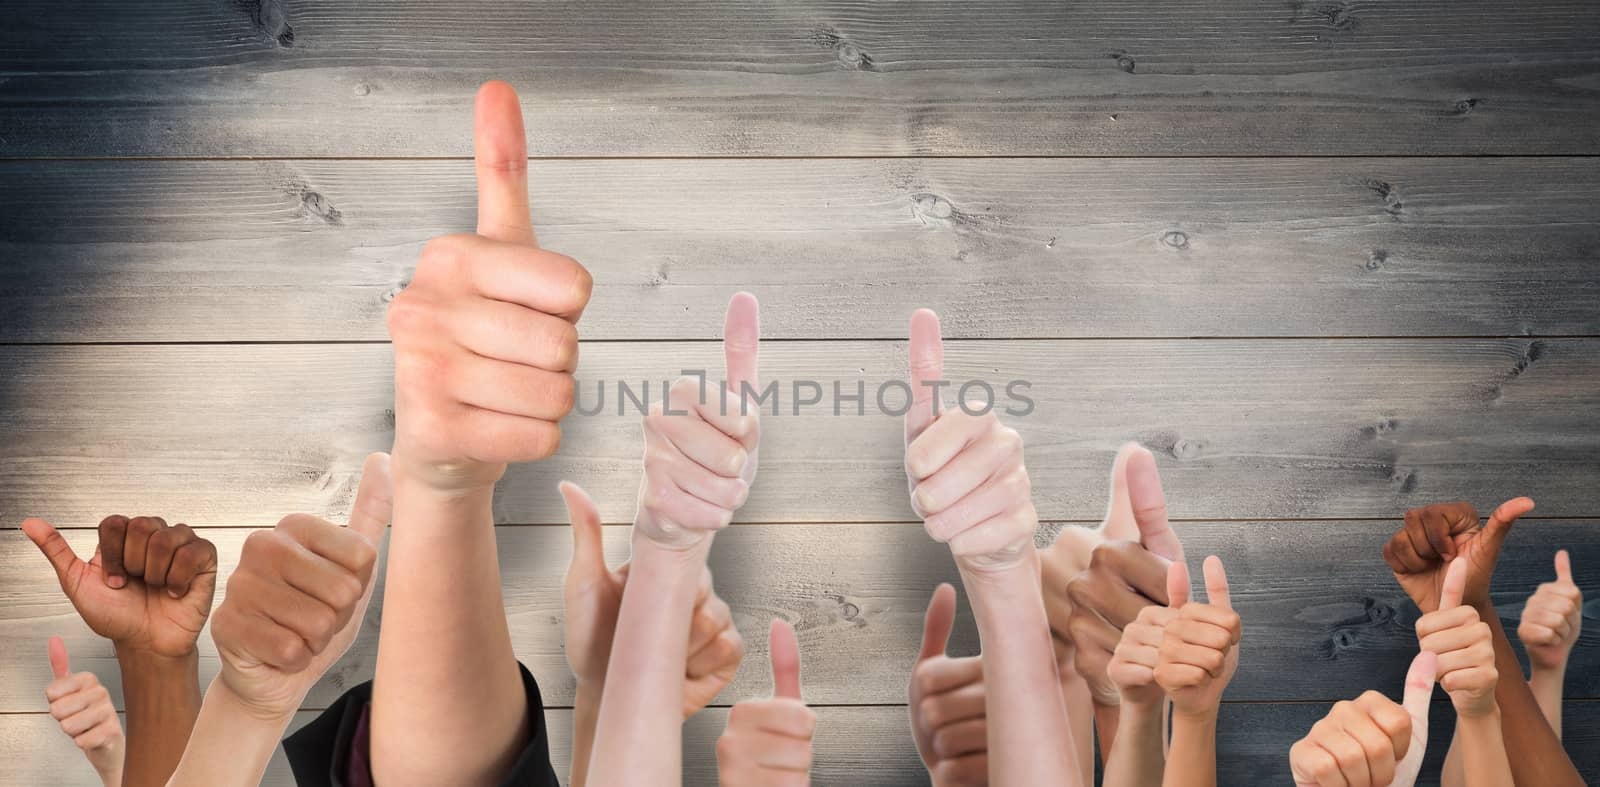 Hands showing thumbs up against bleached wooden planks background